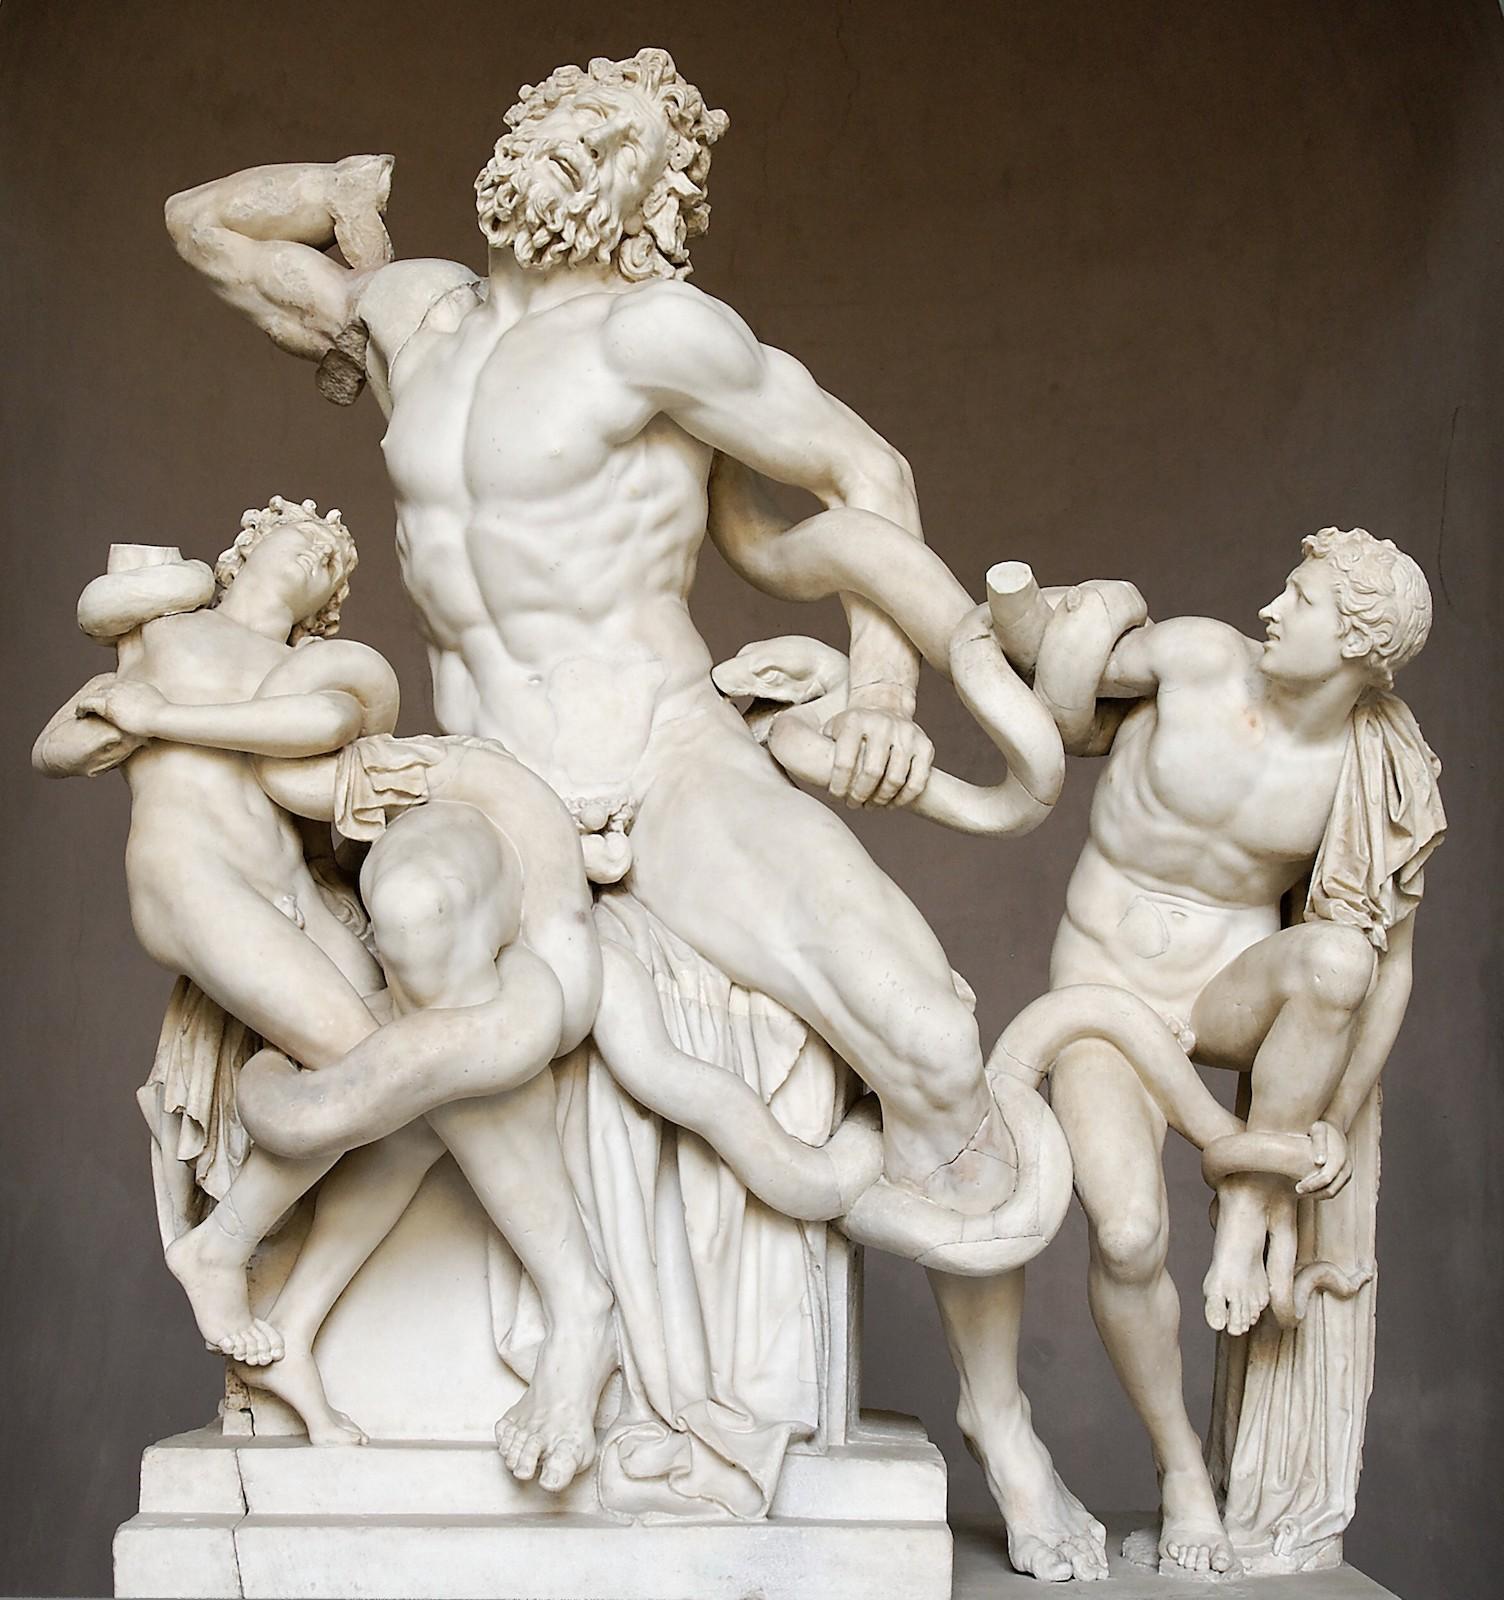 Hagesandros, Athenedoros, and Polydoros, Laocoön and his sons, c. 150 BCE. Marble.